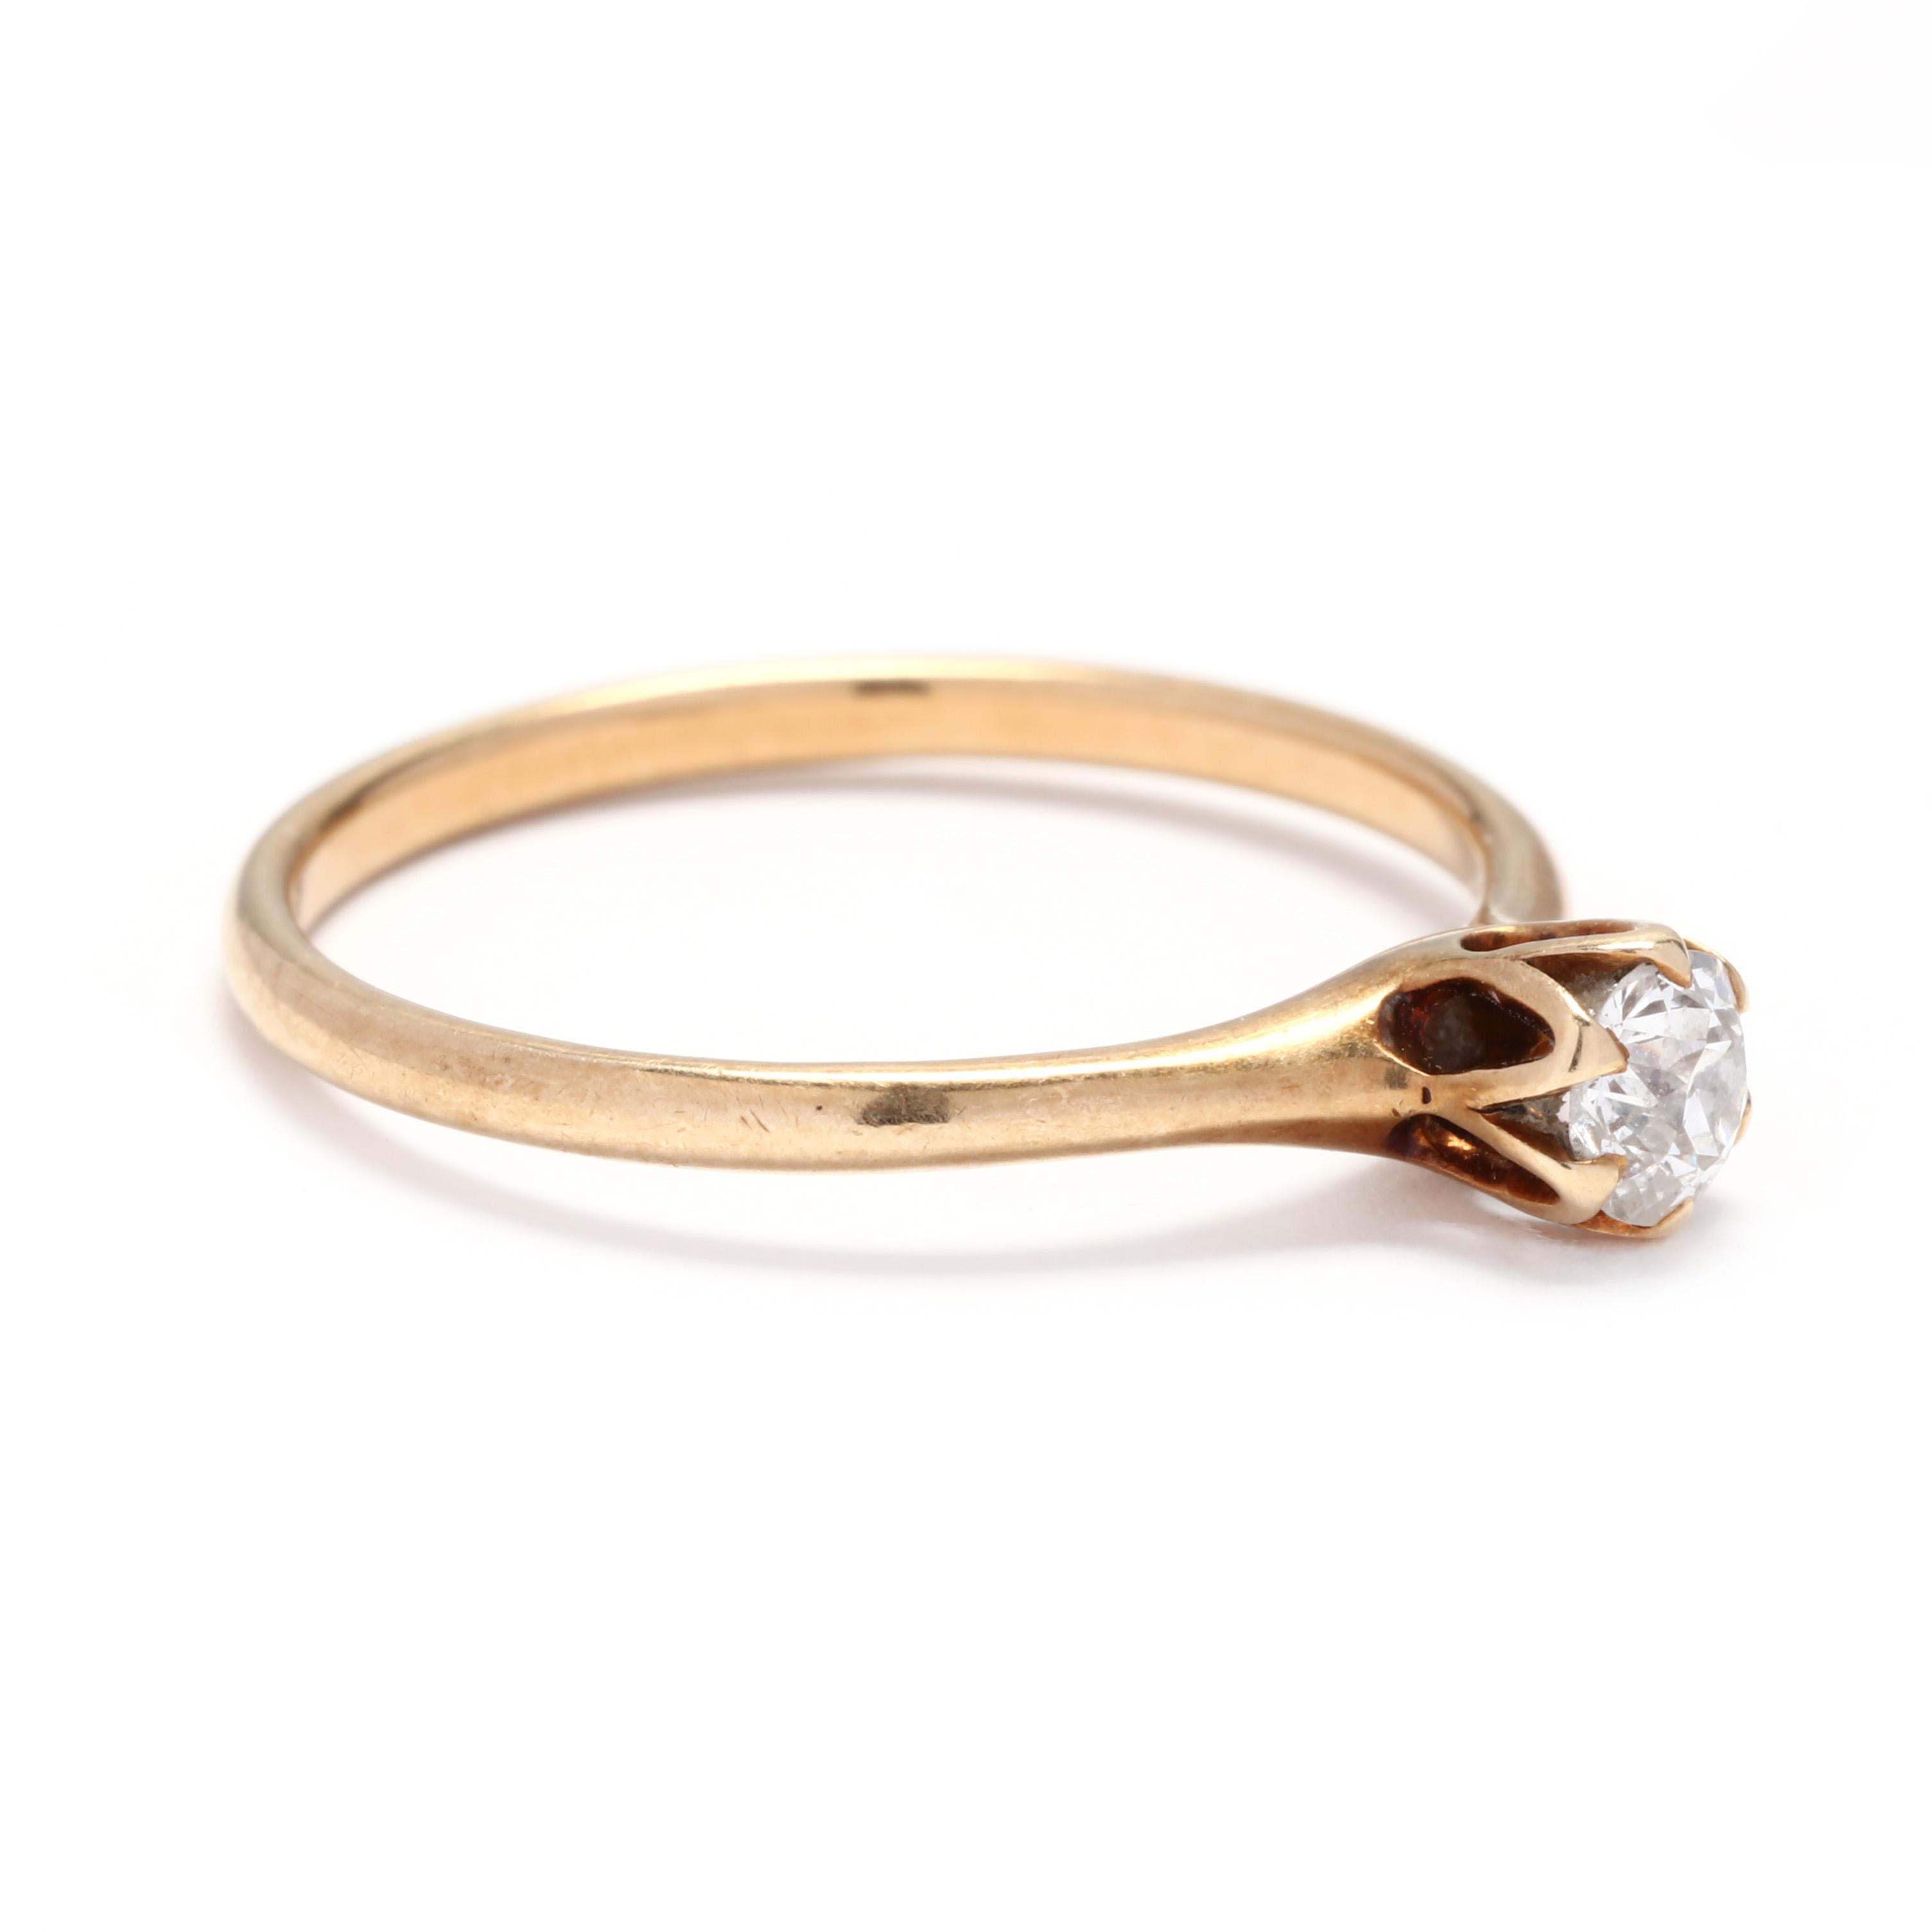 A victorian 14 karat yellow gold old European cut diamond engagement ring. This ring features a thin band with a prong set old European cut diamond weighing approximately .25 carat.

Stones:
- diamond, 1 stone
- old European cut
- 4 mm
-